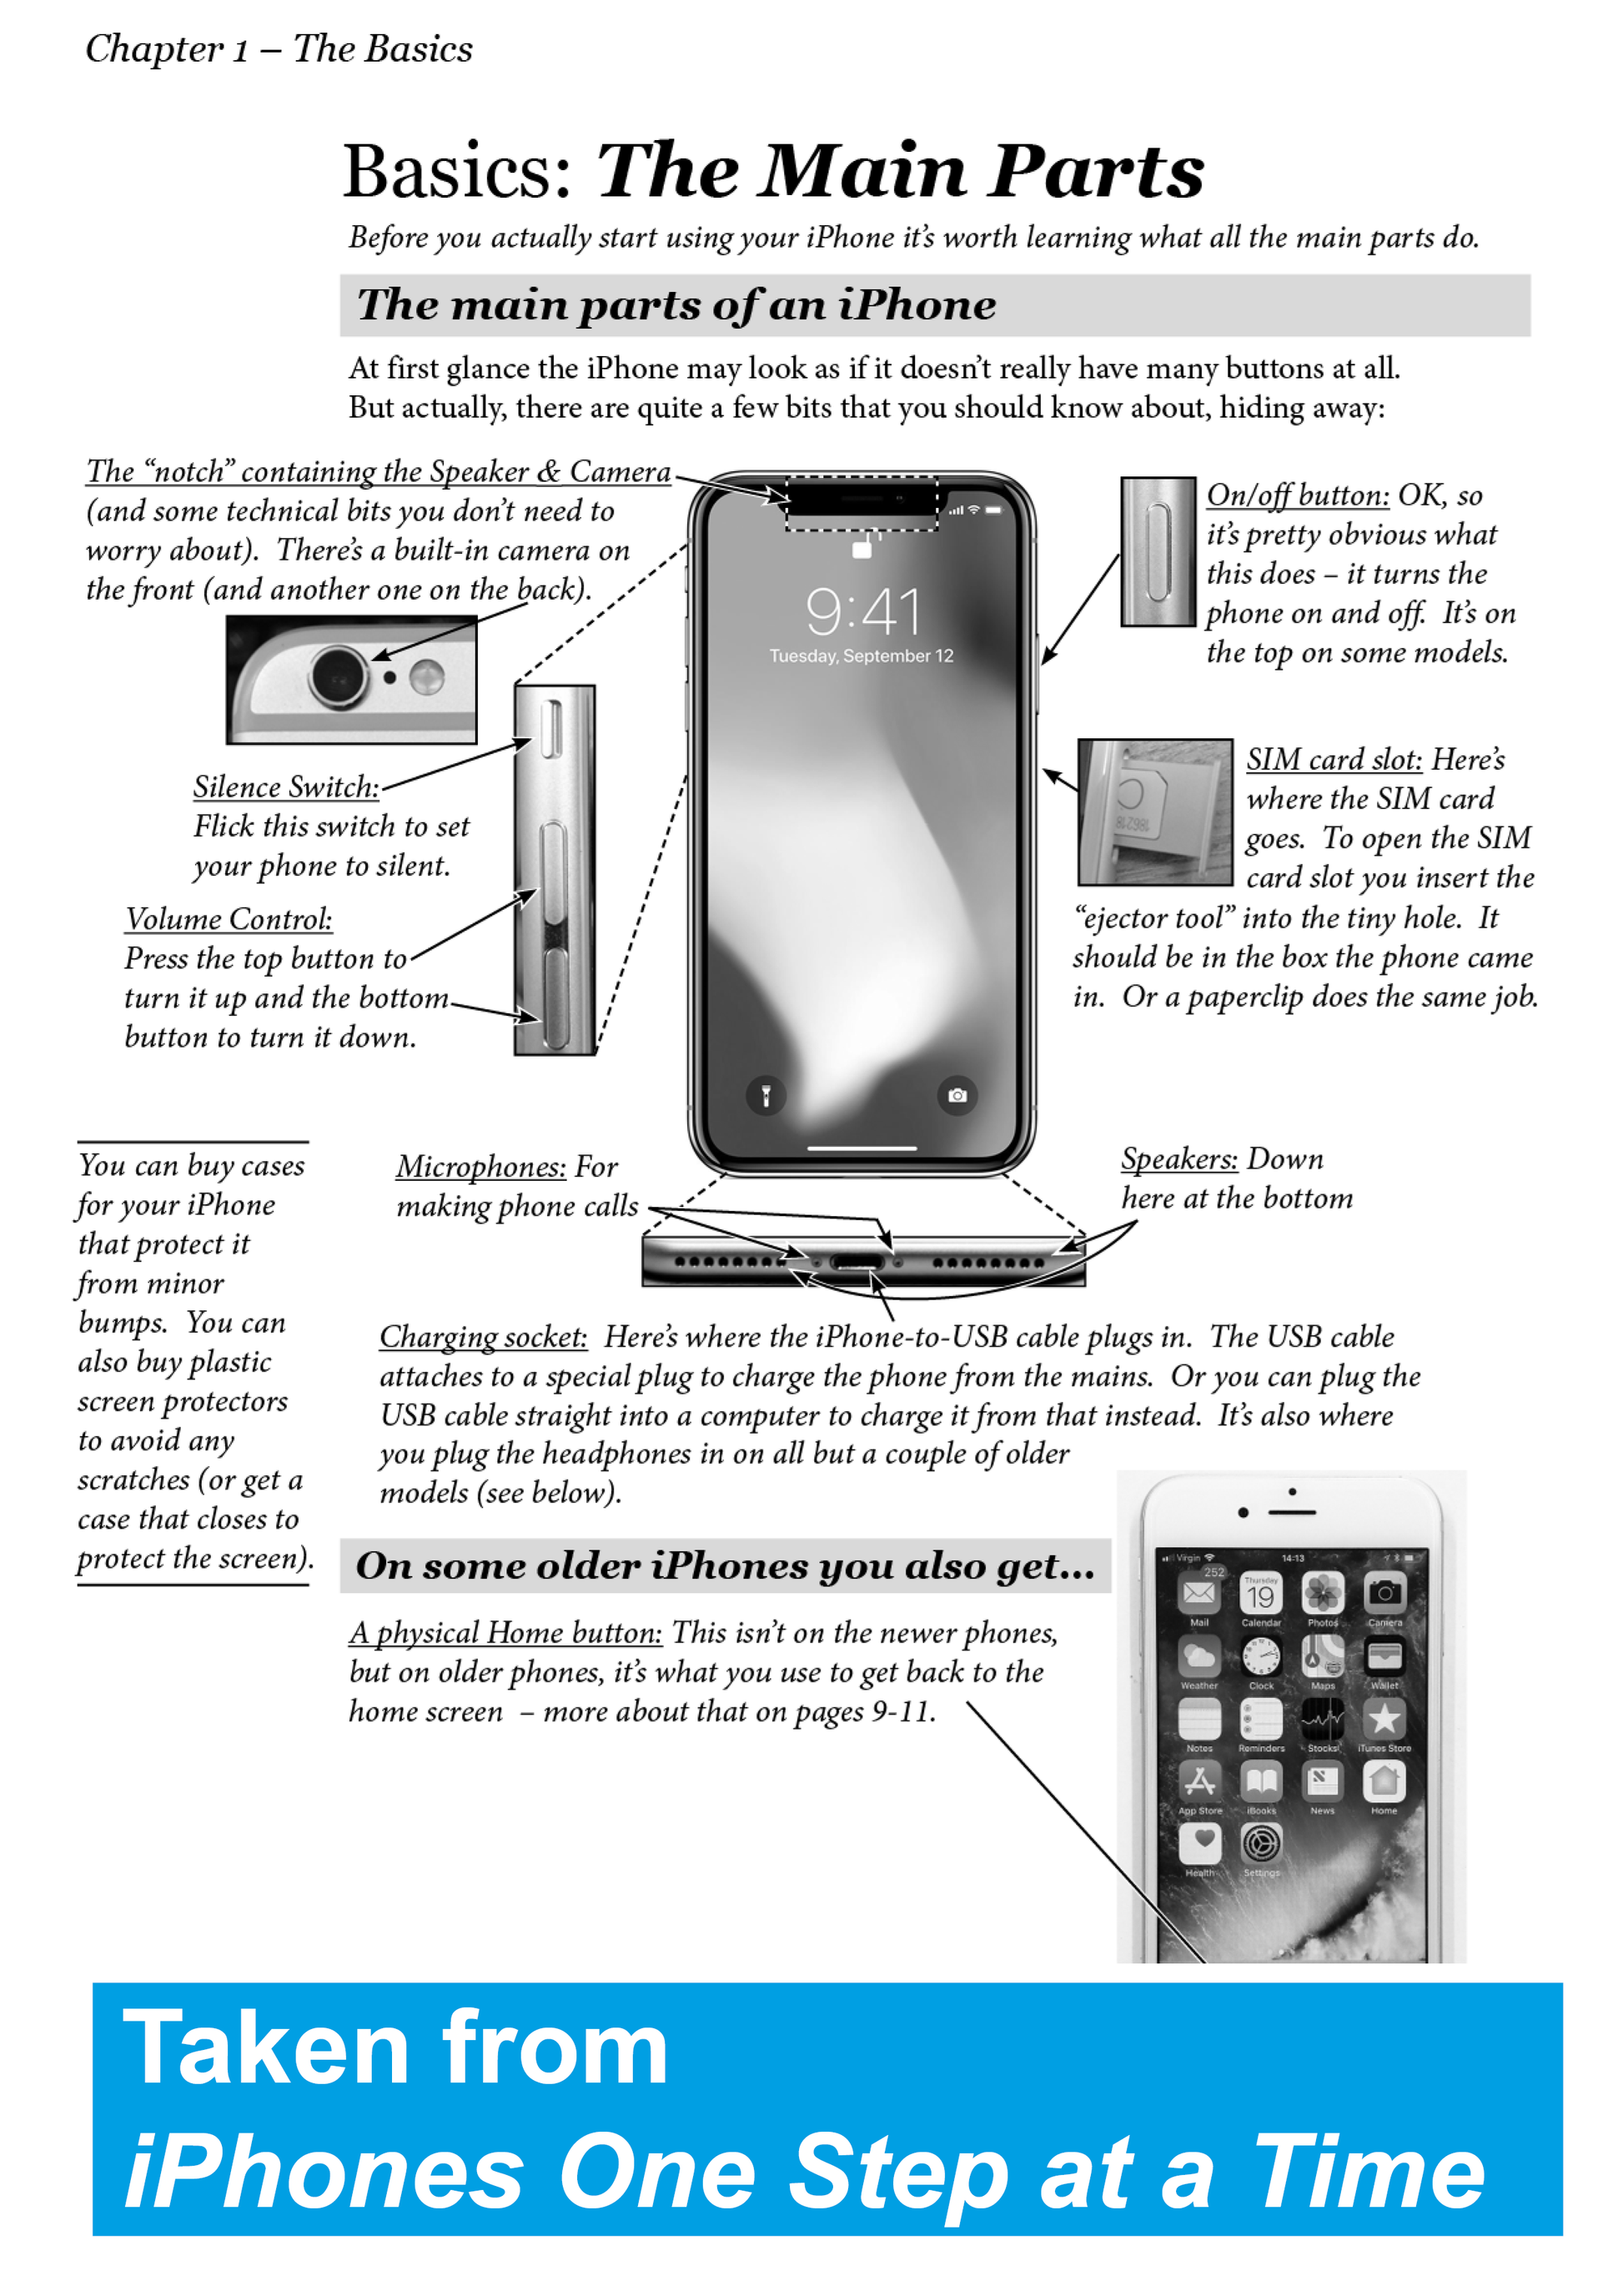 Sample pages for iPhones One Step at a Time